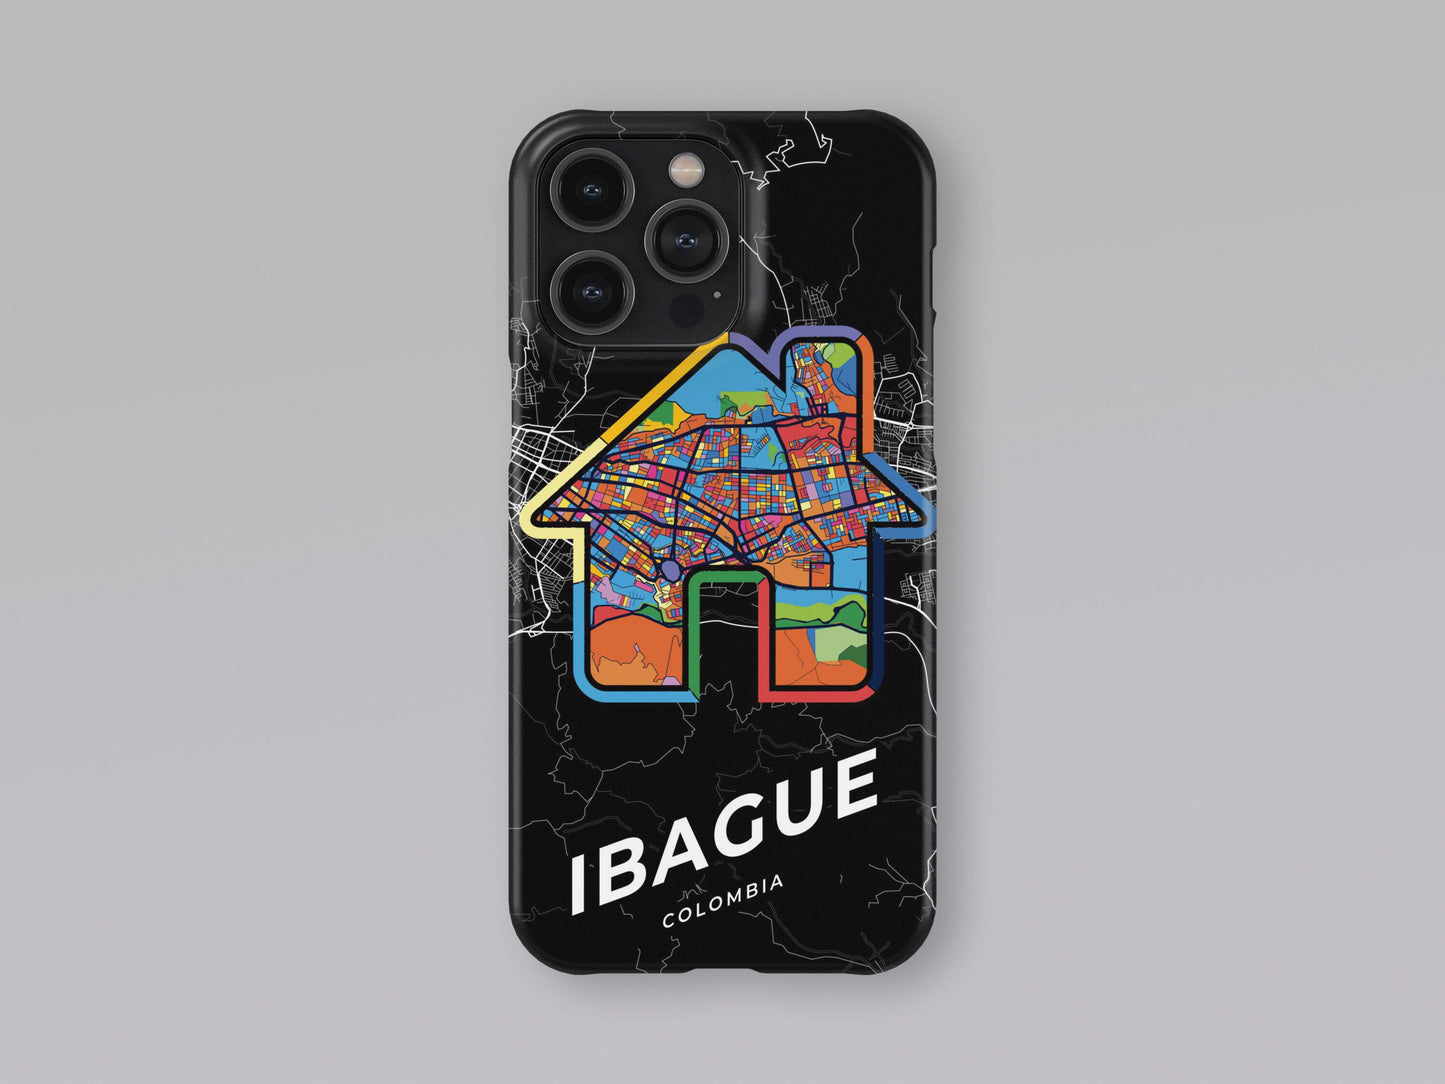 Ibague Colombia slim phone case with colorful icon. Birthday, wedding or housewarming gift. Couple match cases. 3